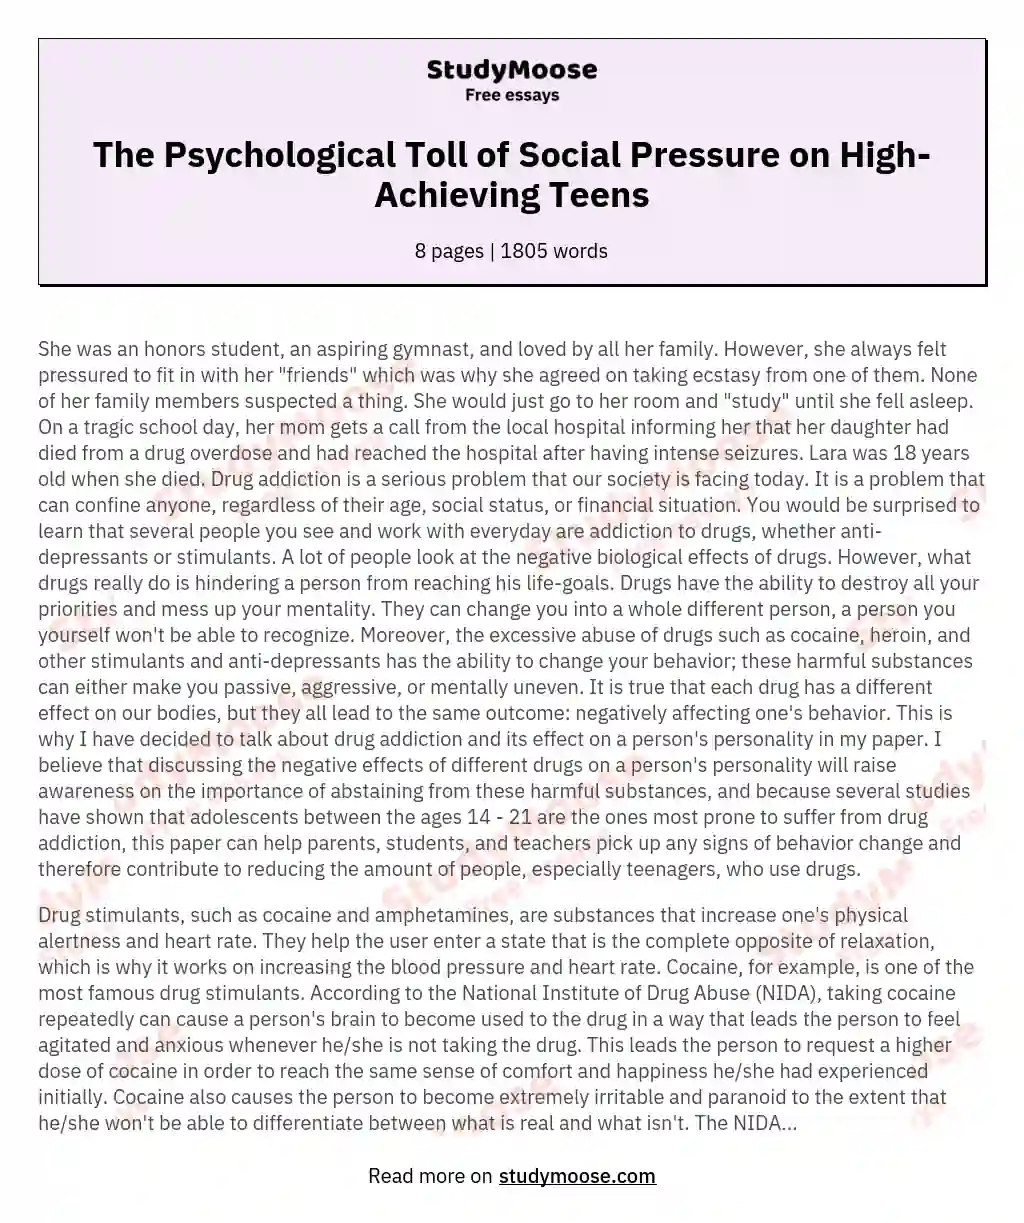 The Psychological Toll of Social Pressure on High-Achieving Teens essay